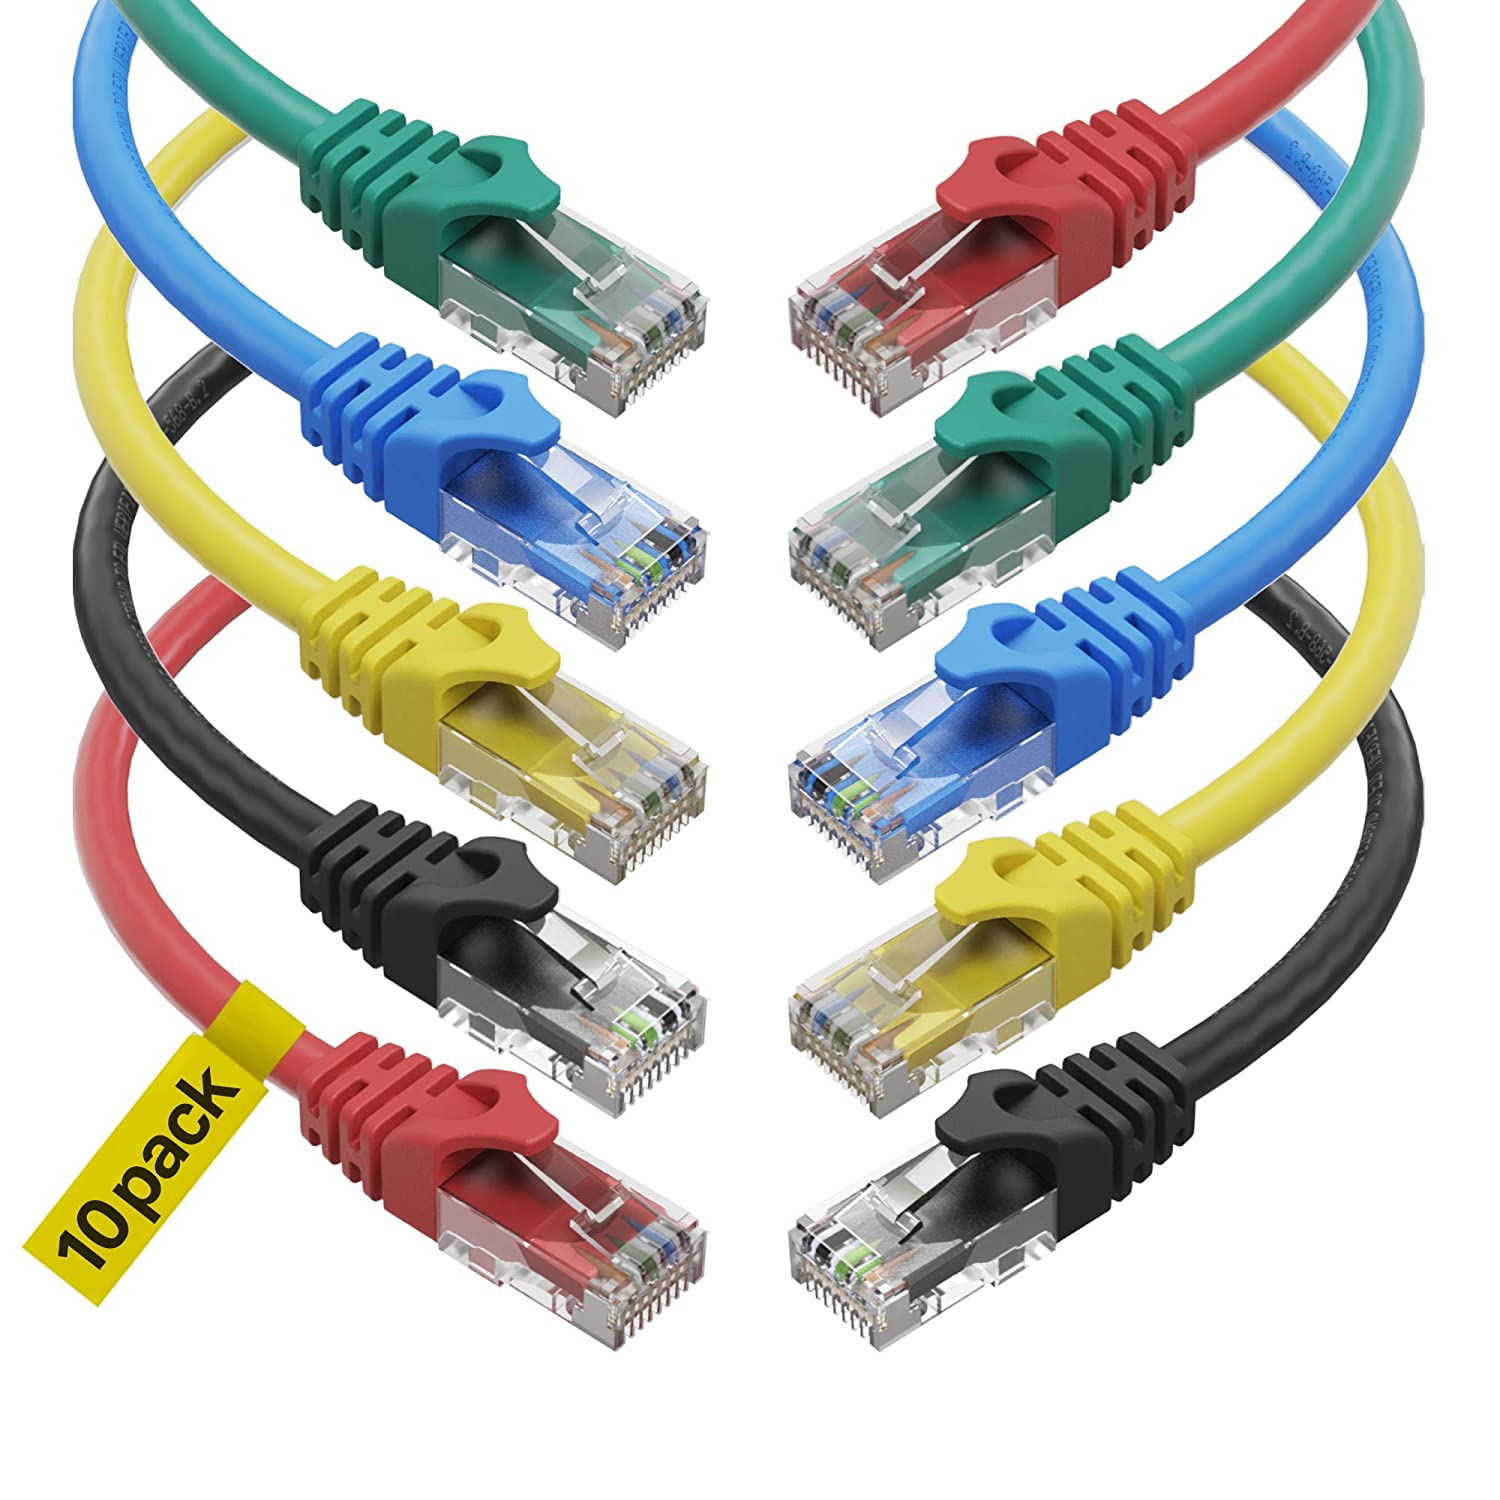 Ethernet Cable Coupons & Offers